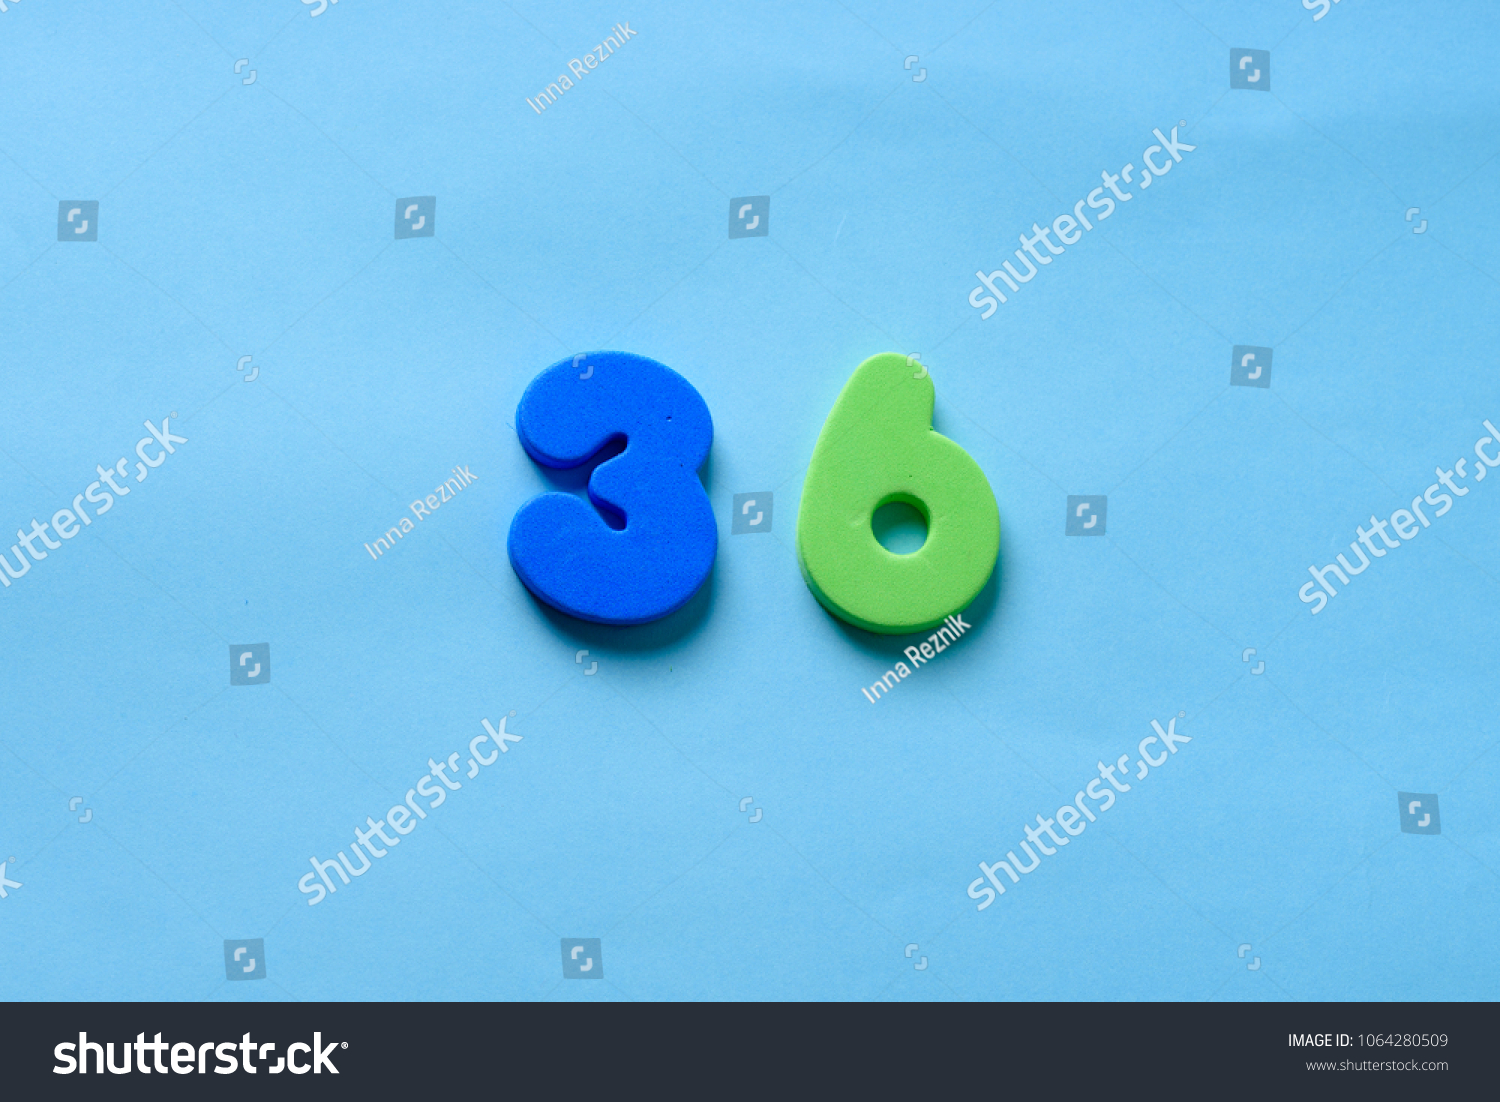 191 36 th birthday Images, Stock Photos & Vectors | Shutterstock